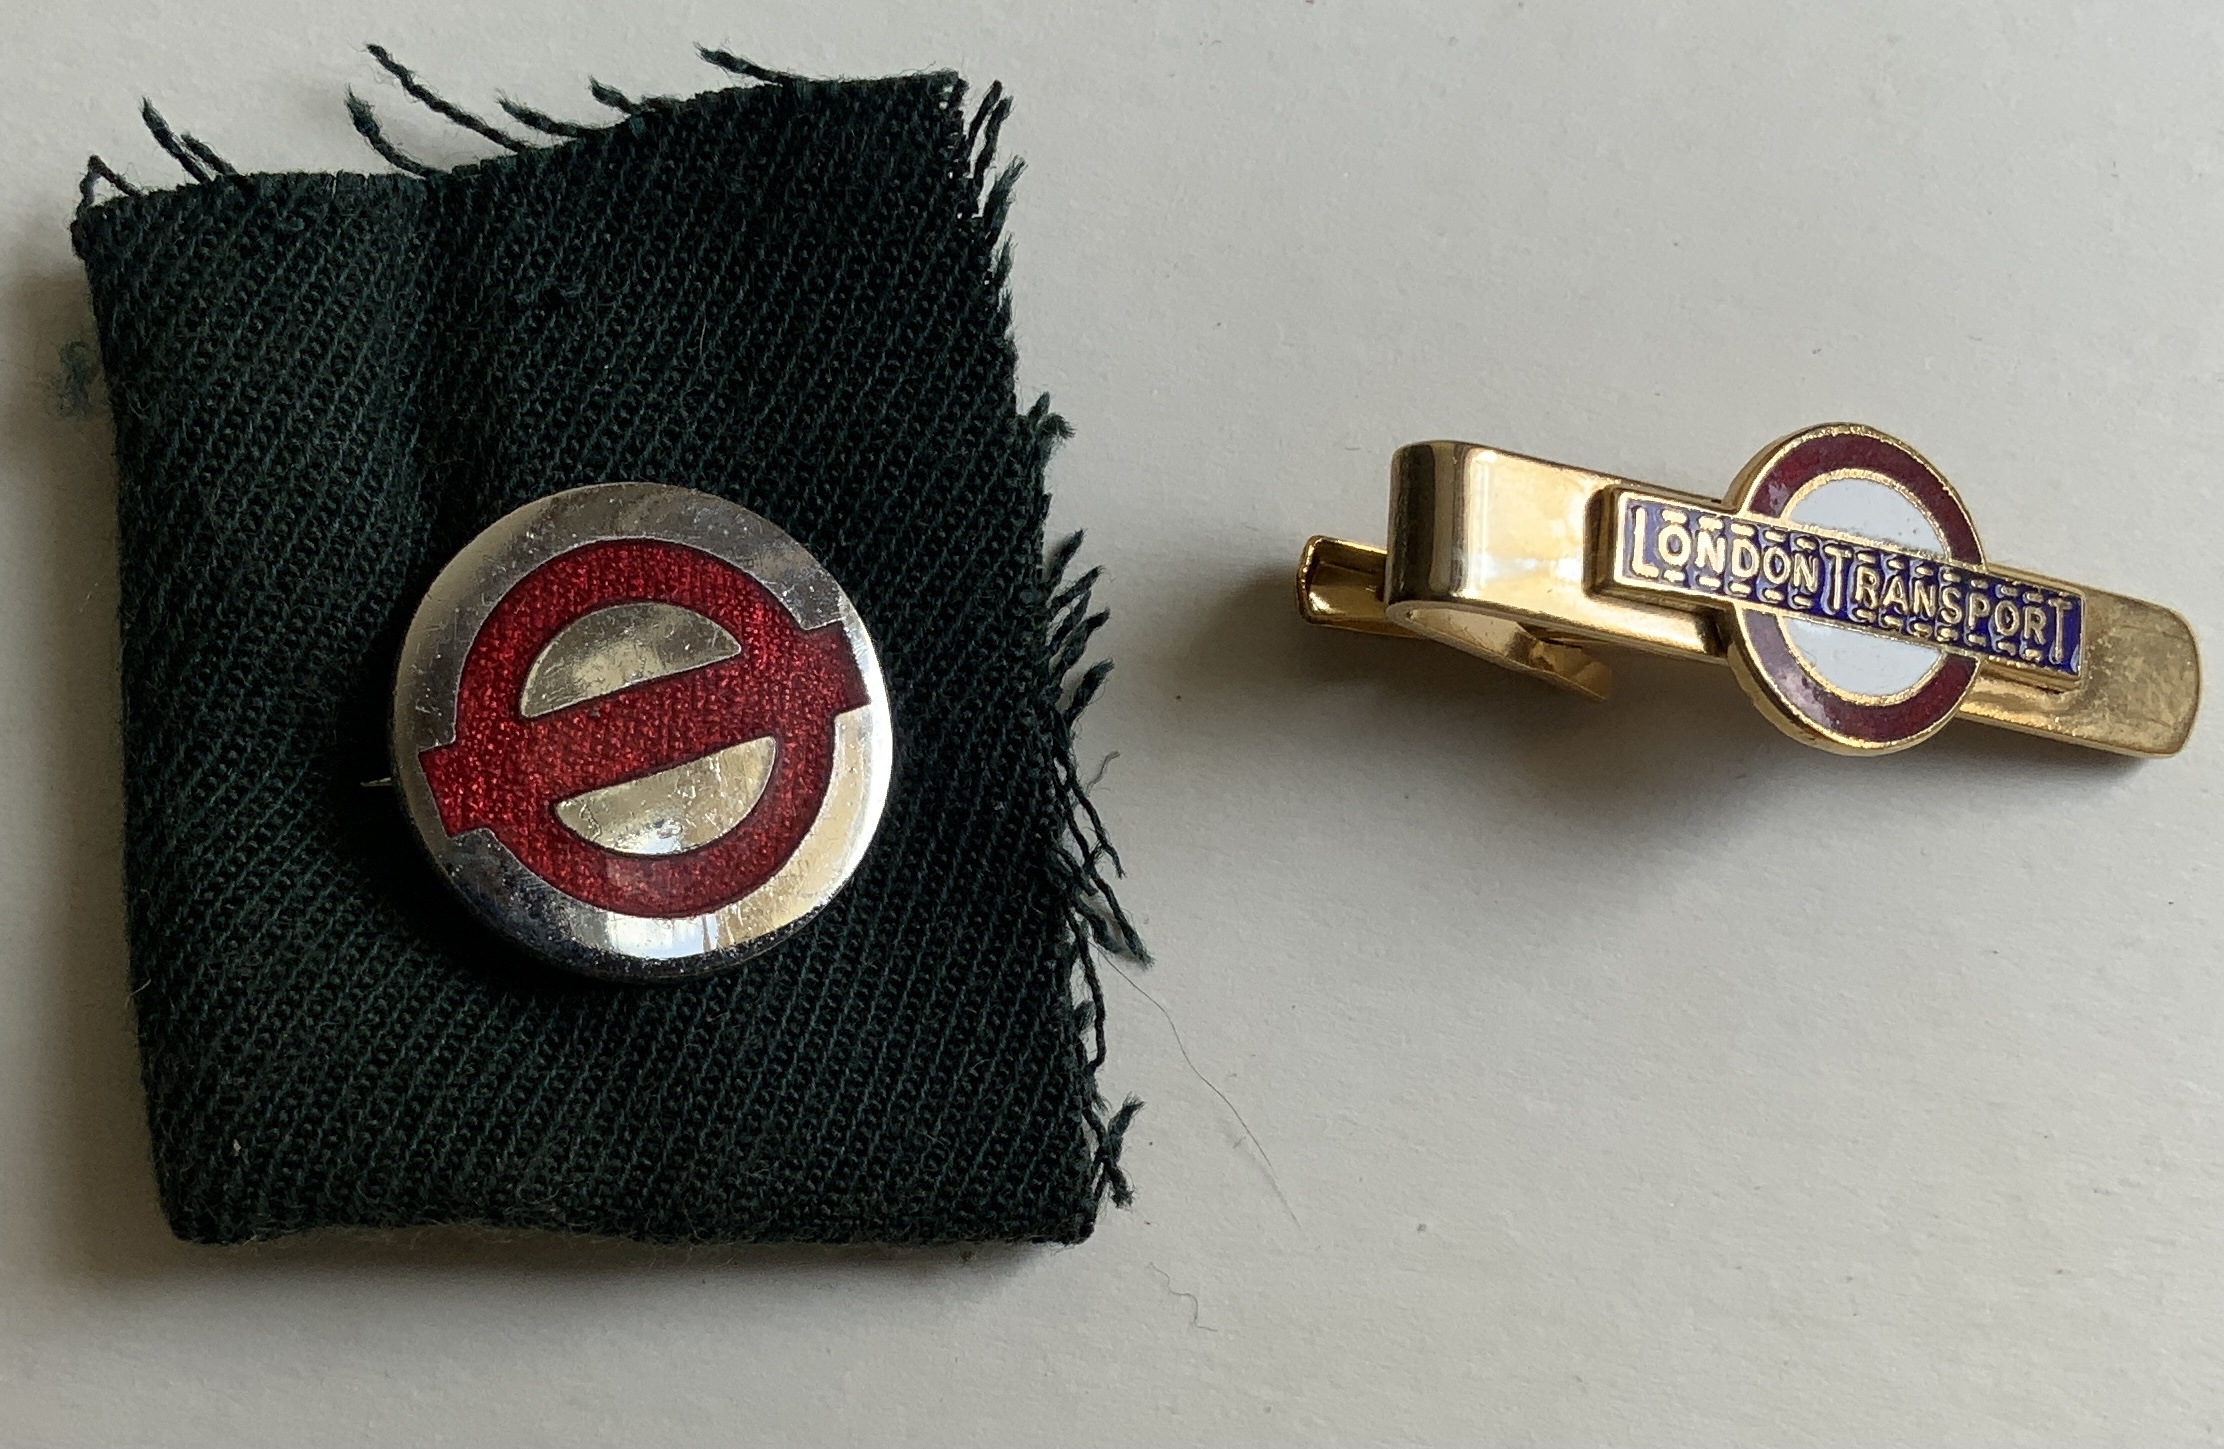 M62	LONDON UNDERGROUND EMPLOYEE’S LAPPEL AND BADGE AND TIE CLIP